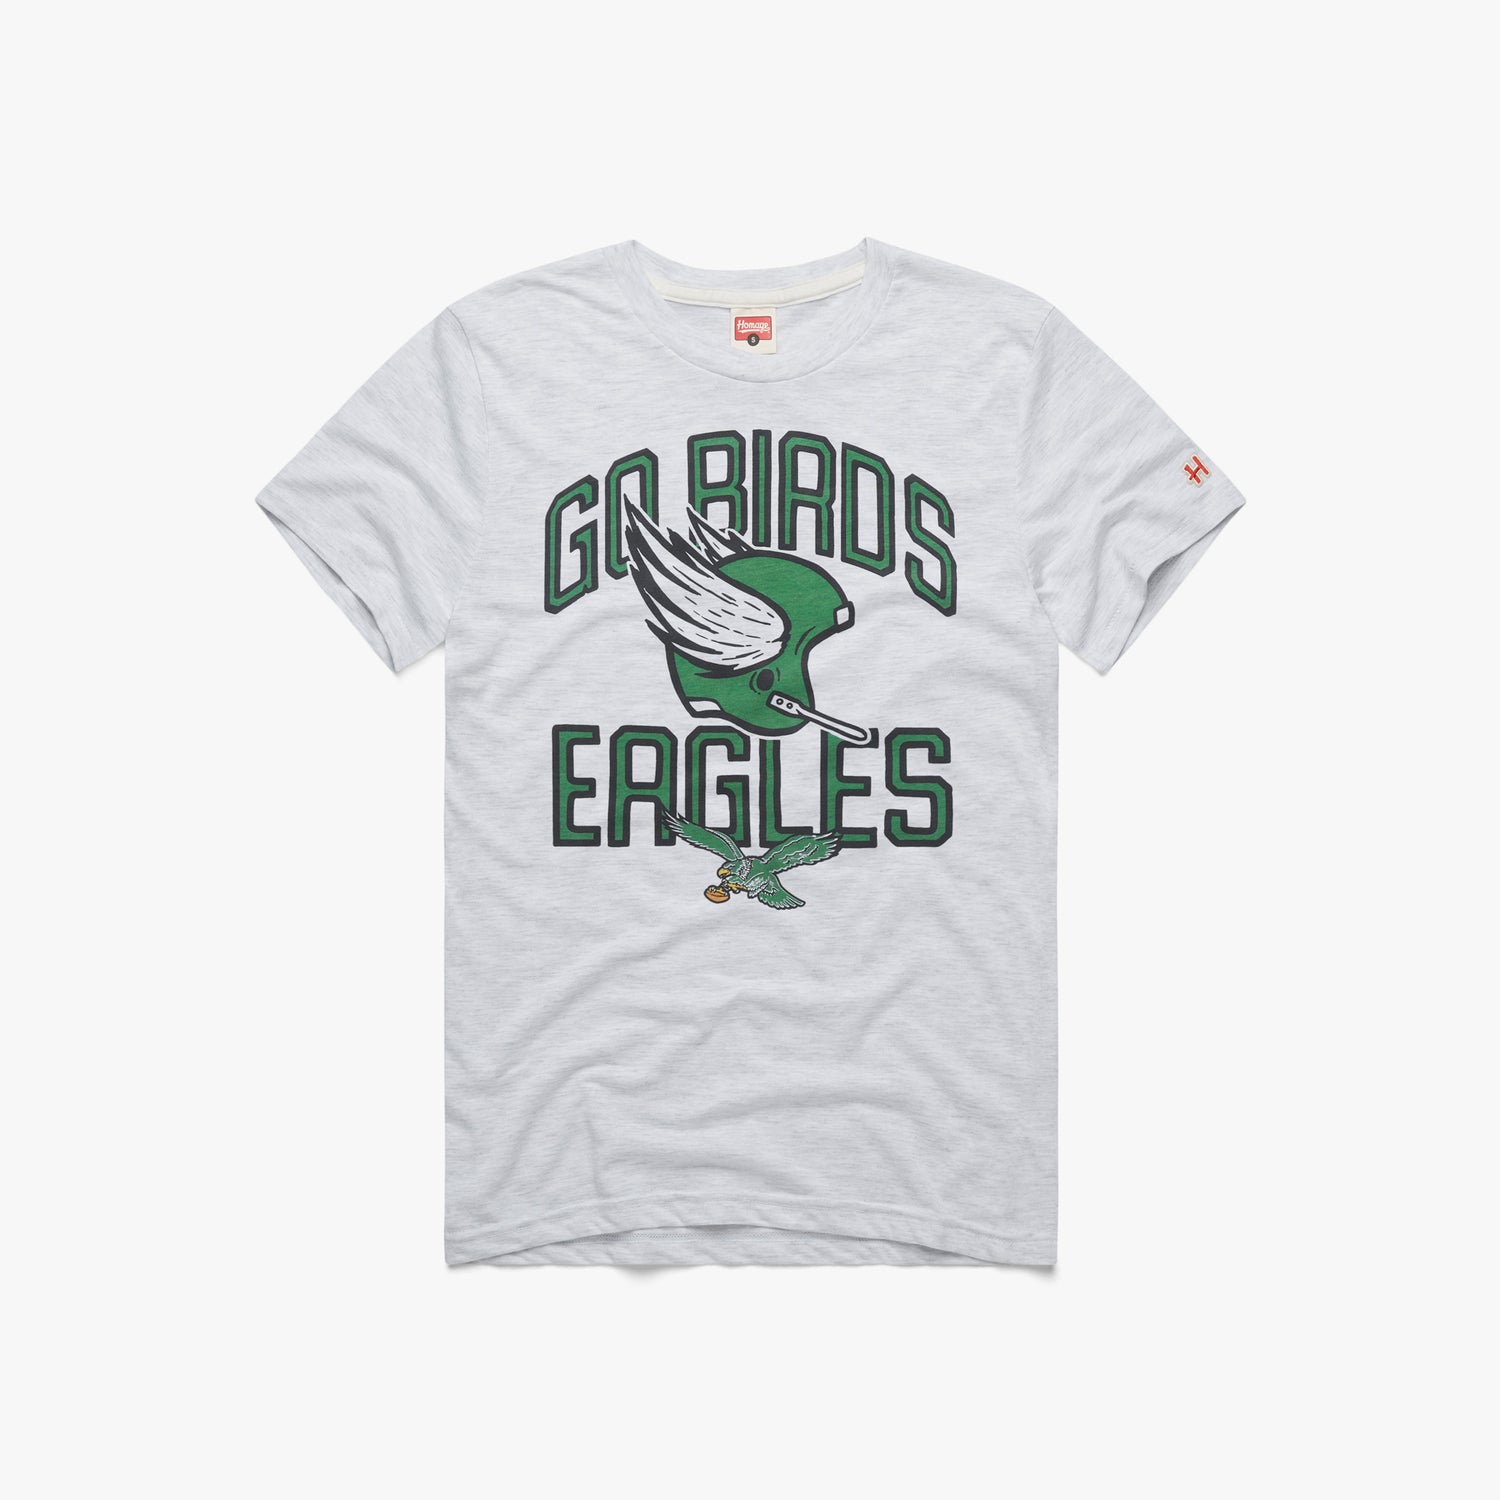 Philadelphia Eagles Throwback Helmet T-Shirt | Kelly Green Eagles Apparel from Homage. | Officially Licensed NFL Apparel from Homage Pro Shop.